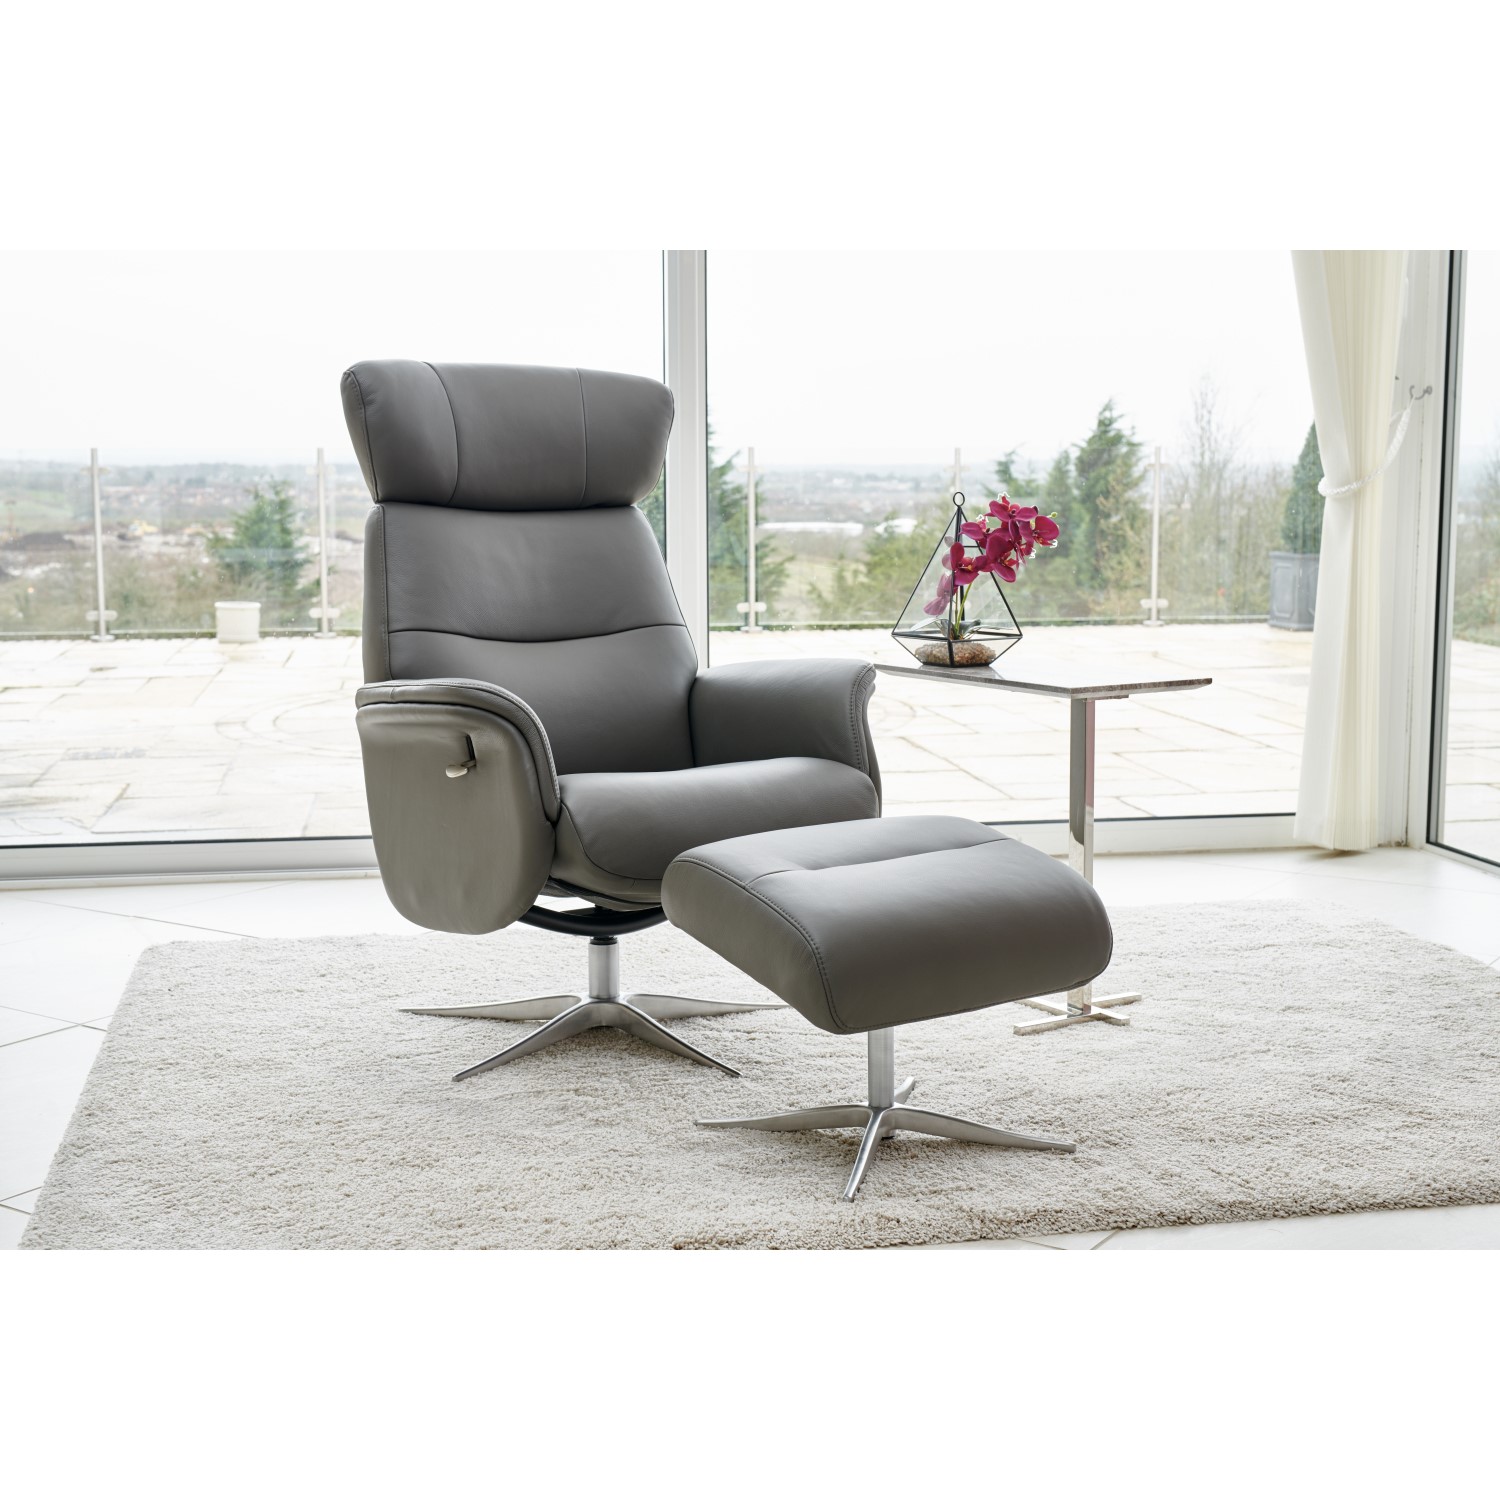 Photo of Dark grey leather swivel recliner armchair with footstool - houston